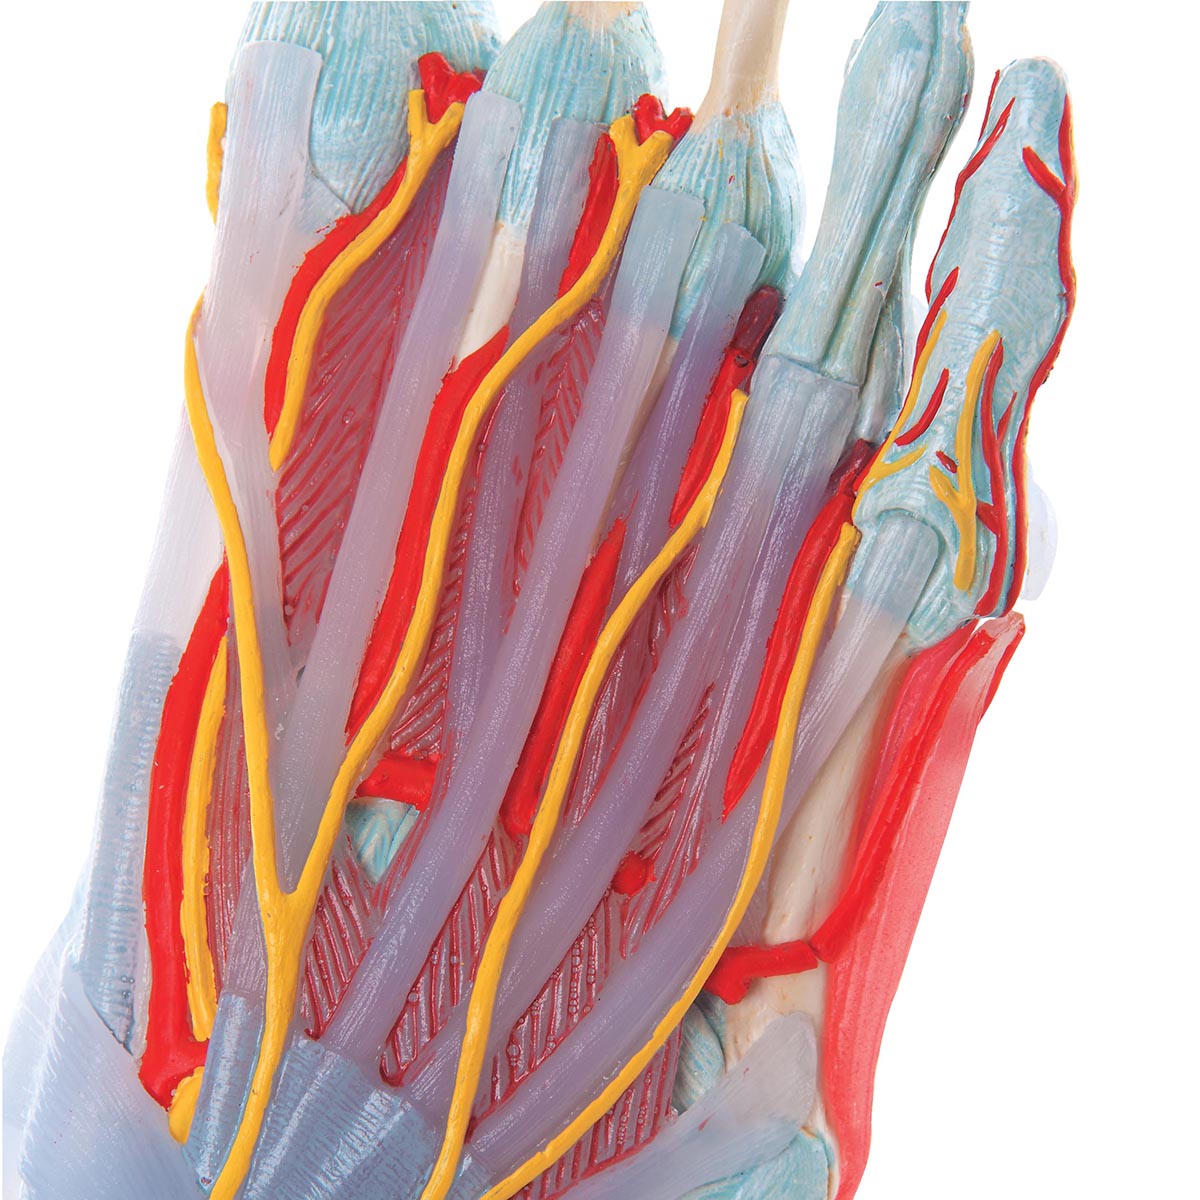 Complete foot model with ligaments, muscles, vessels and nerves - can be separated into 6 parts